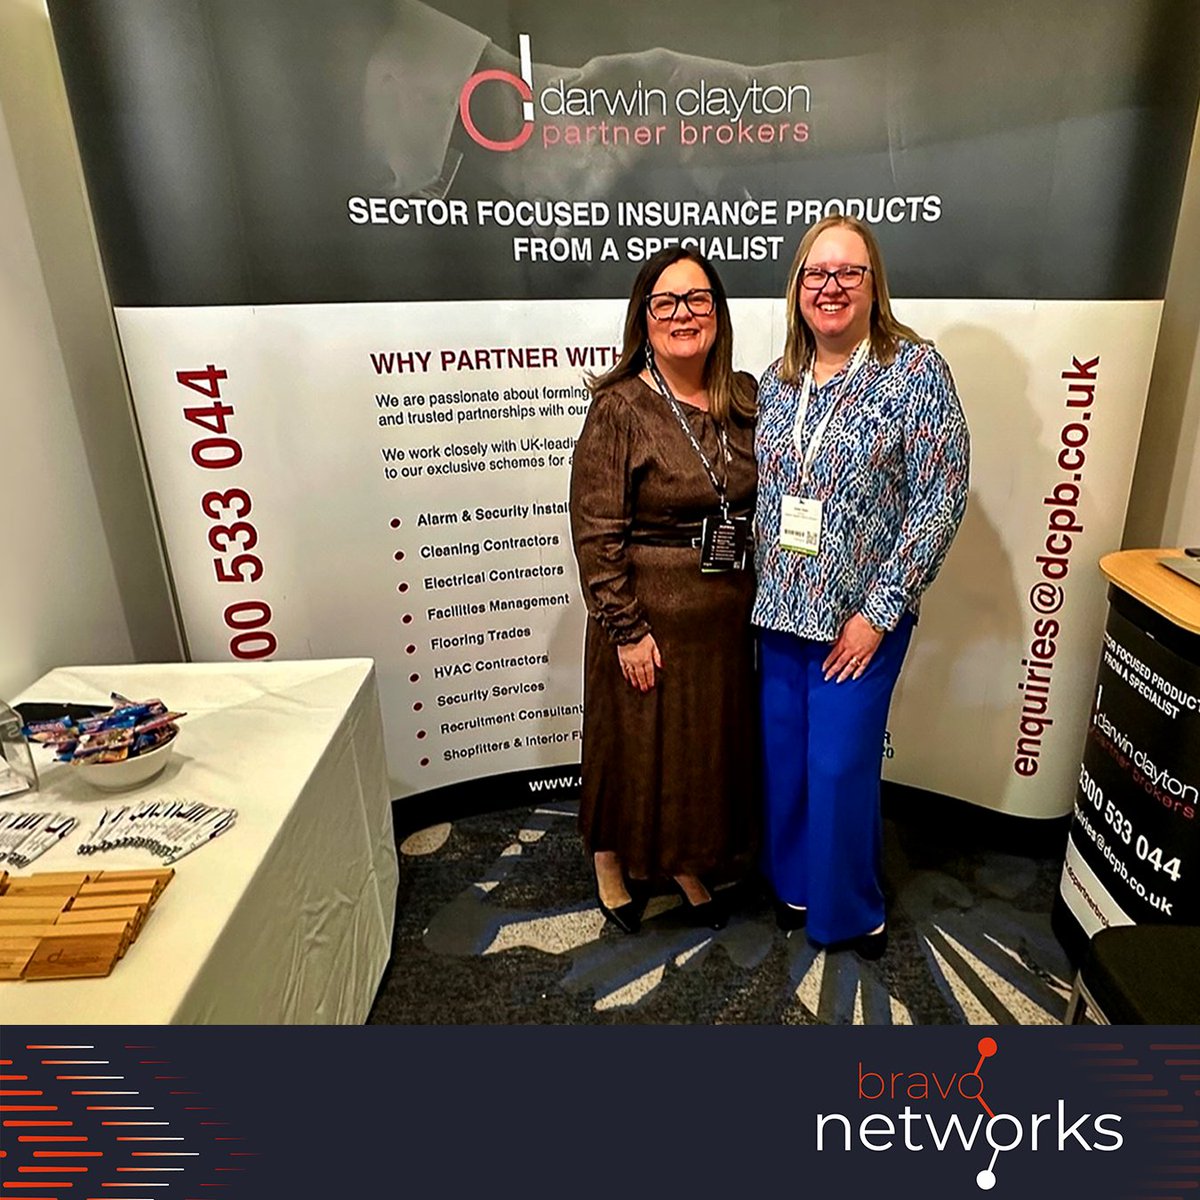 We are ready to go on day 2 of The Bravo Networks National Conference after a vibrant first day.